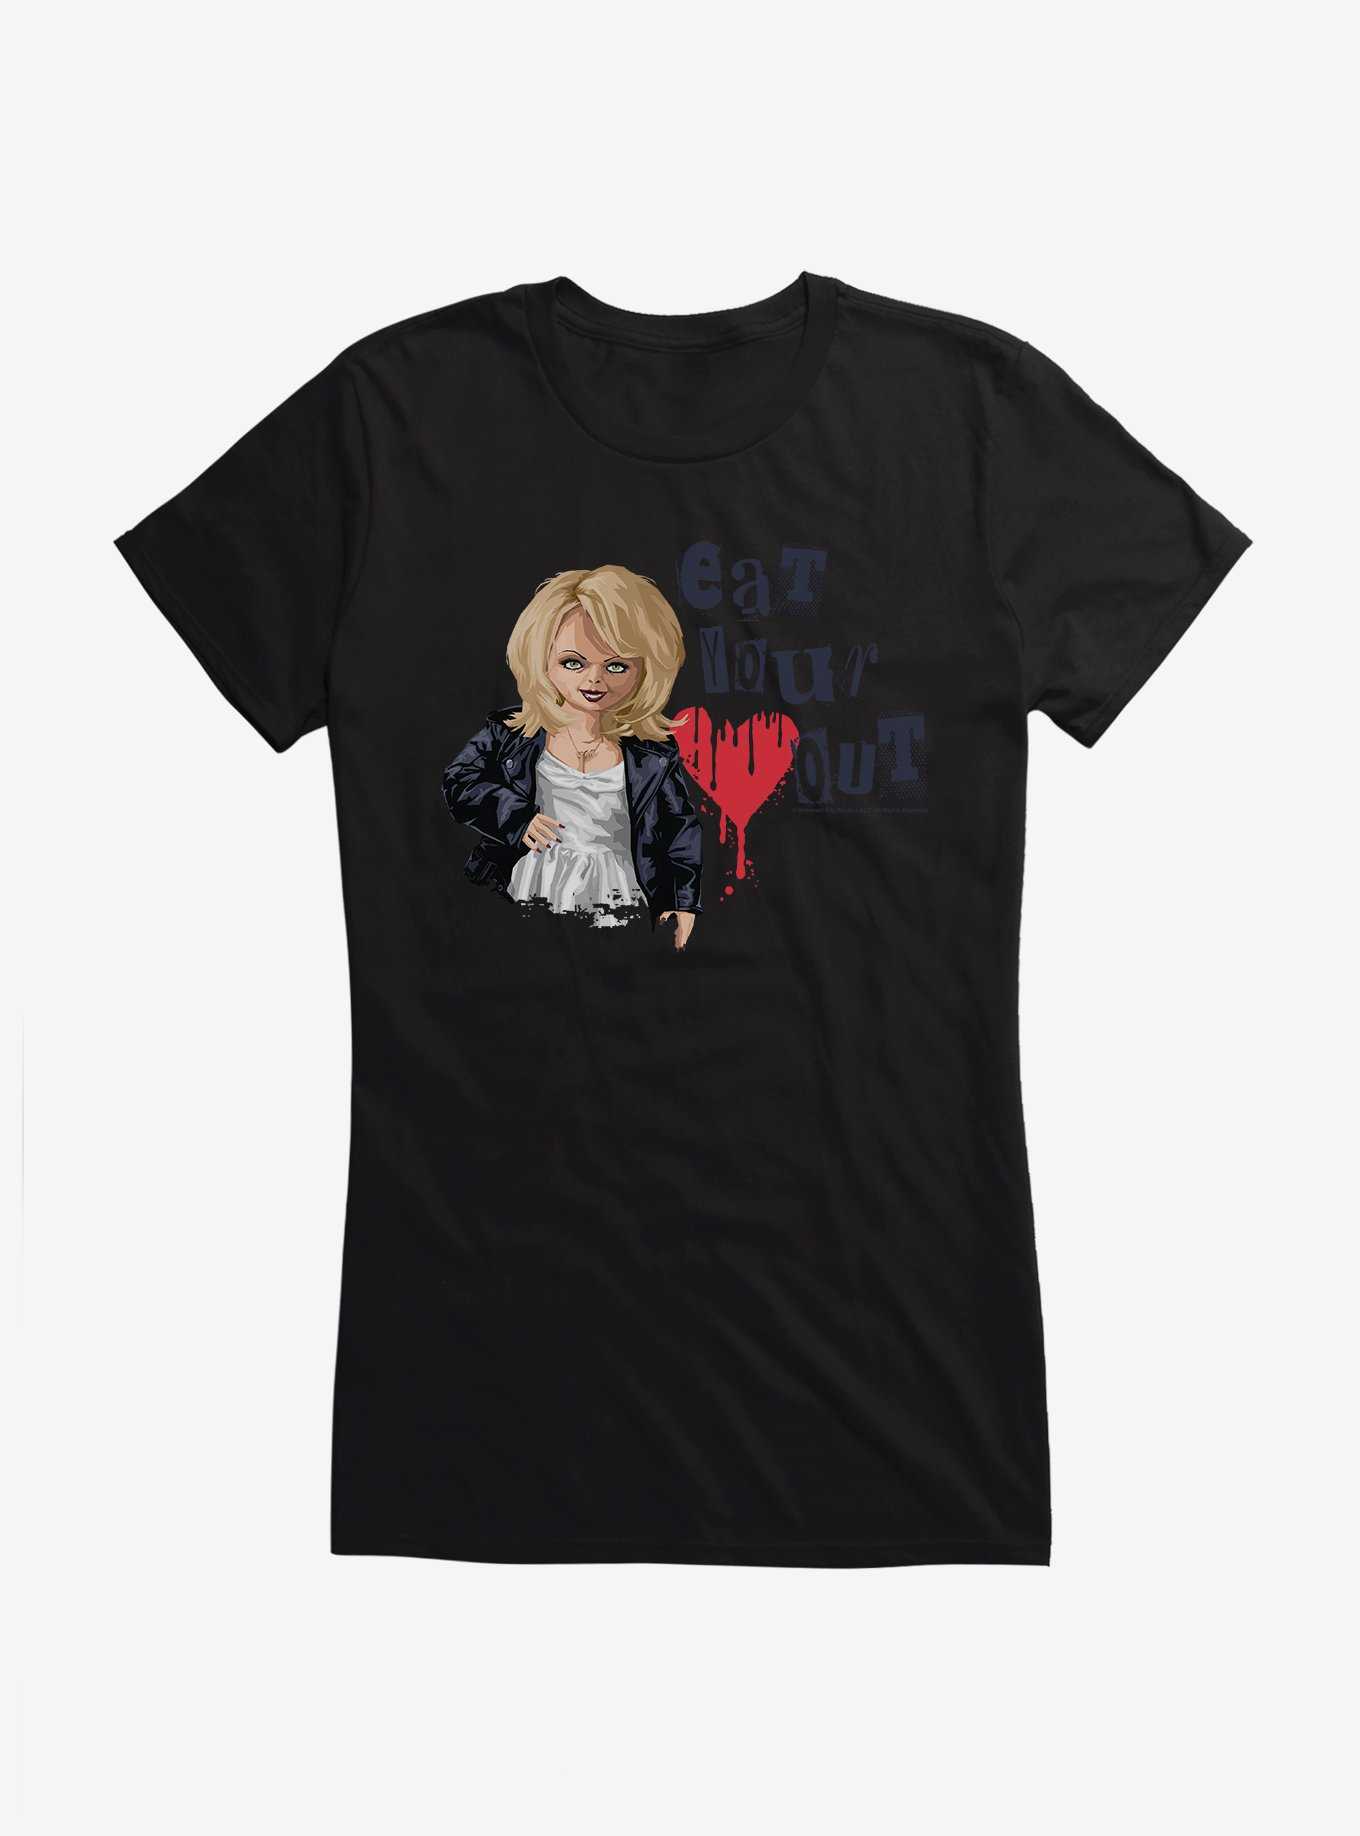 Chucky Eat Your Heart Out Girls T-Shirt, , hi-res